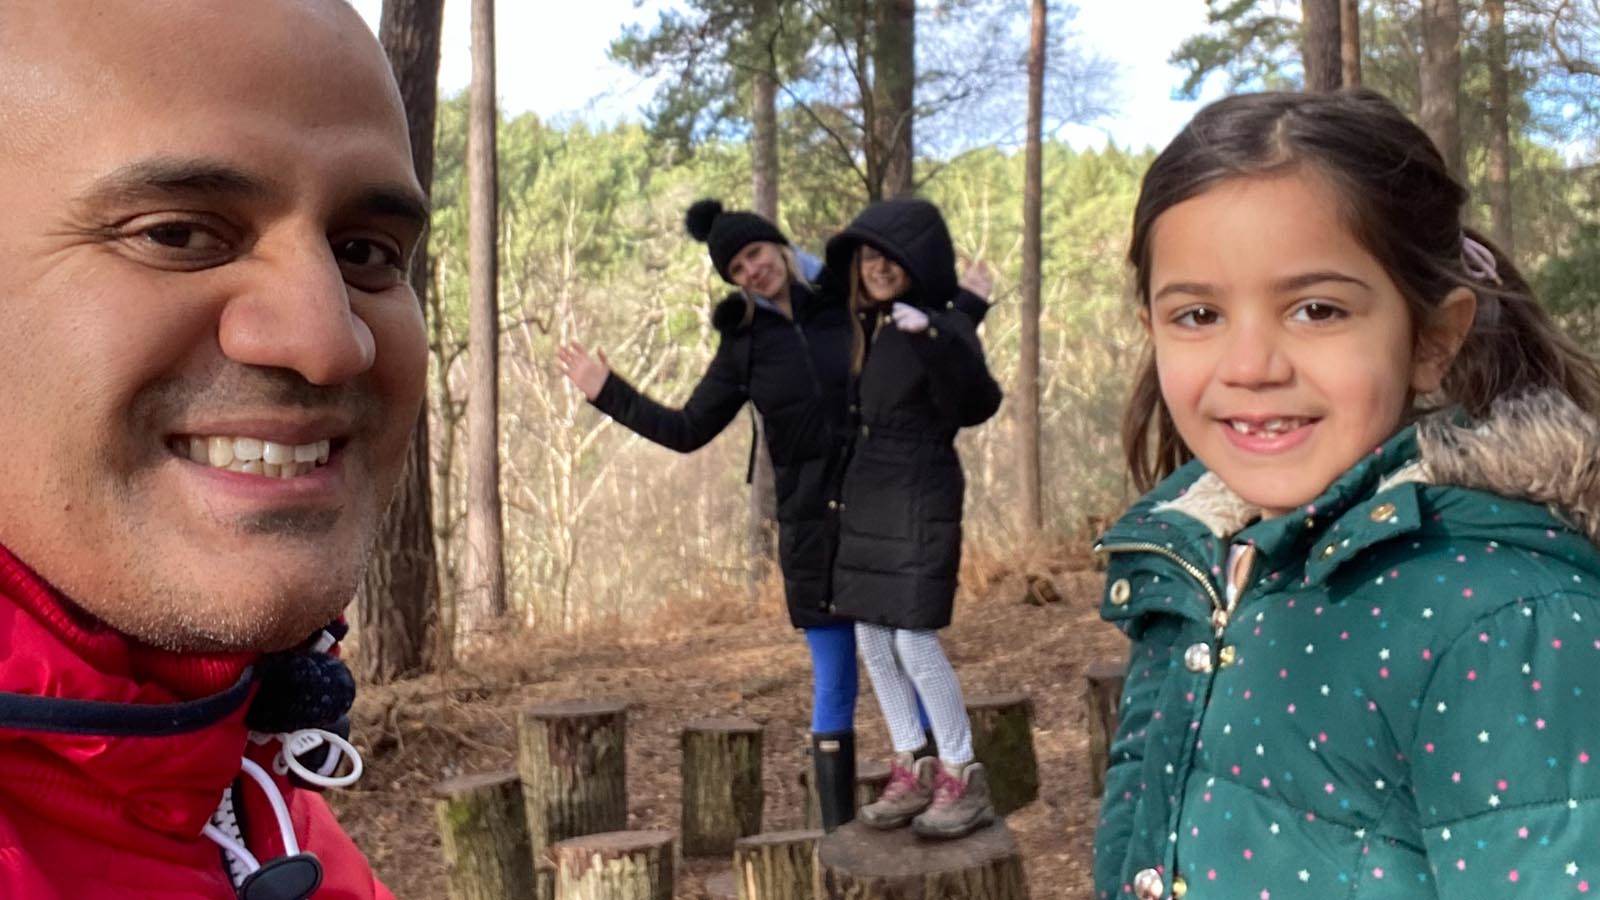 Asif's family hiking trip